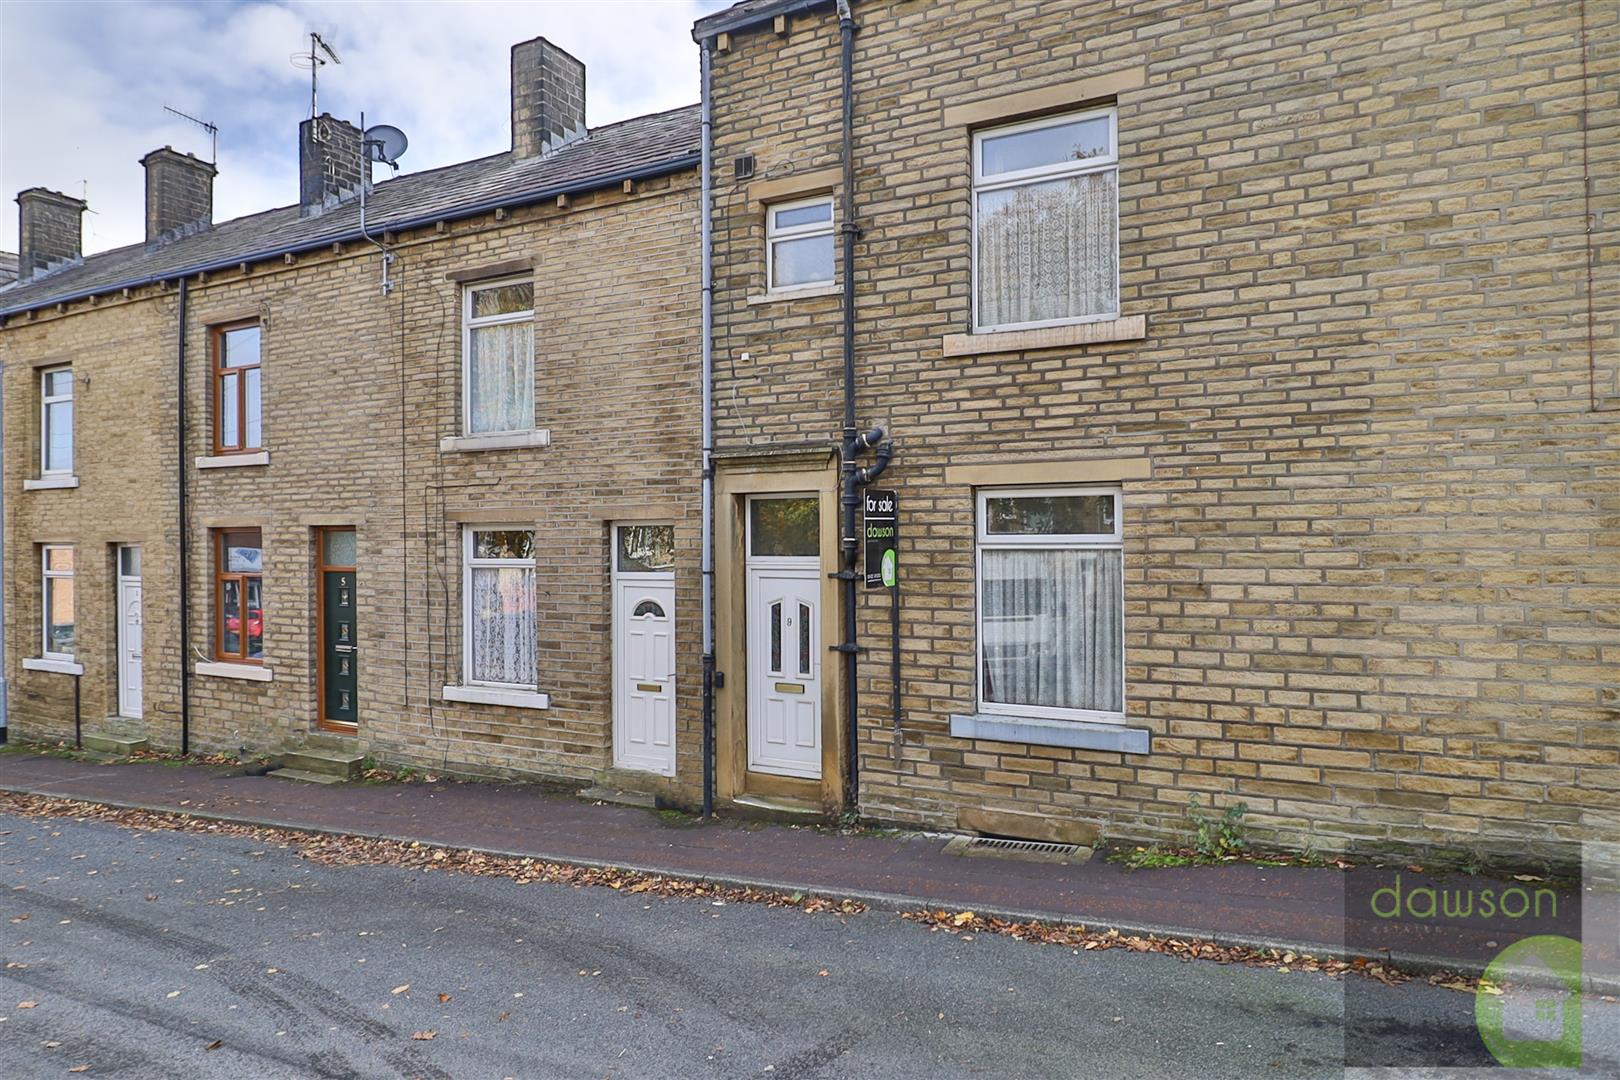 3 bed terraced house for sale in Ainley Street, Elland, HX5 